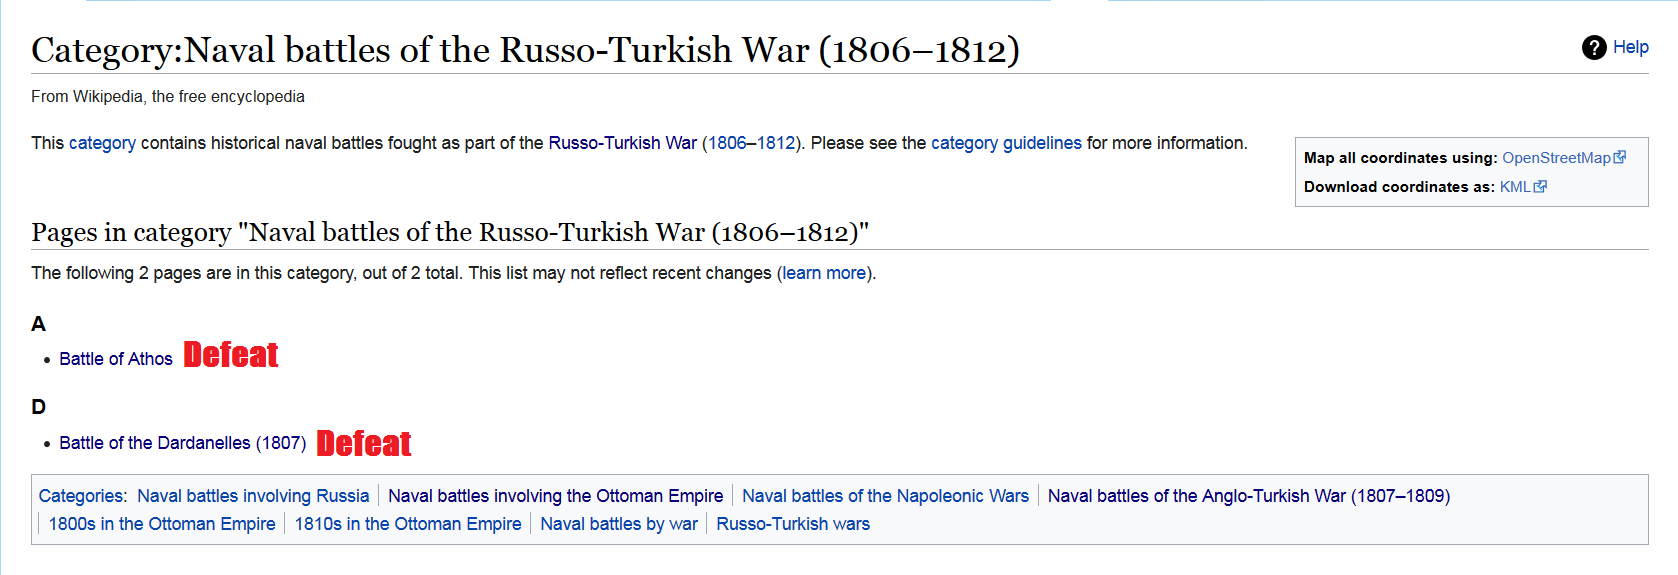 Screenshot_2021-11-12 Category Naval battles of the Russo-Turkish War (1806–1812) - Wikipedia(1).png